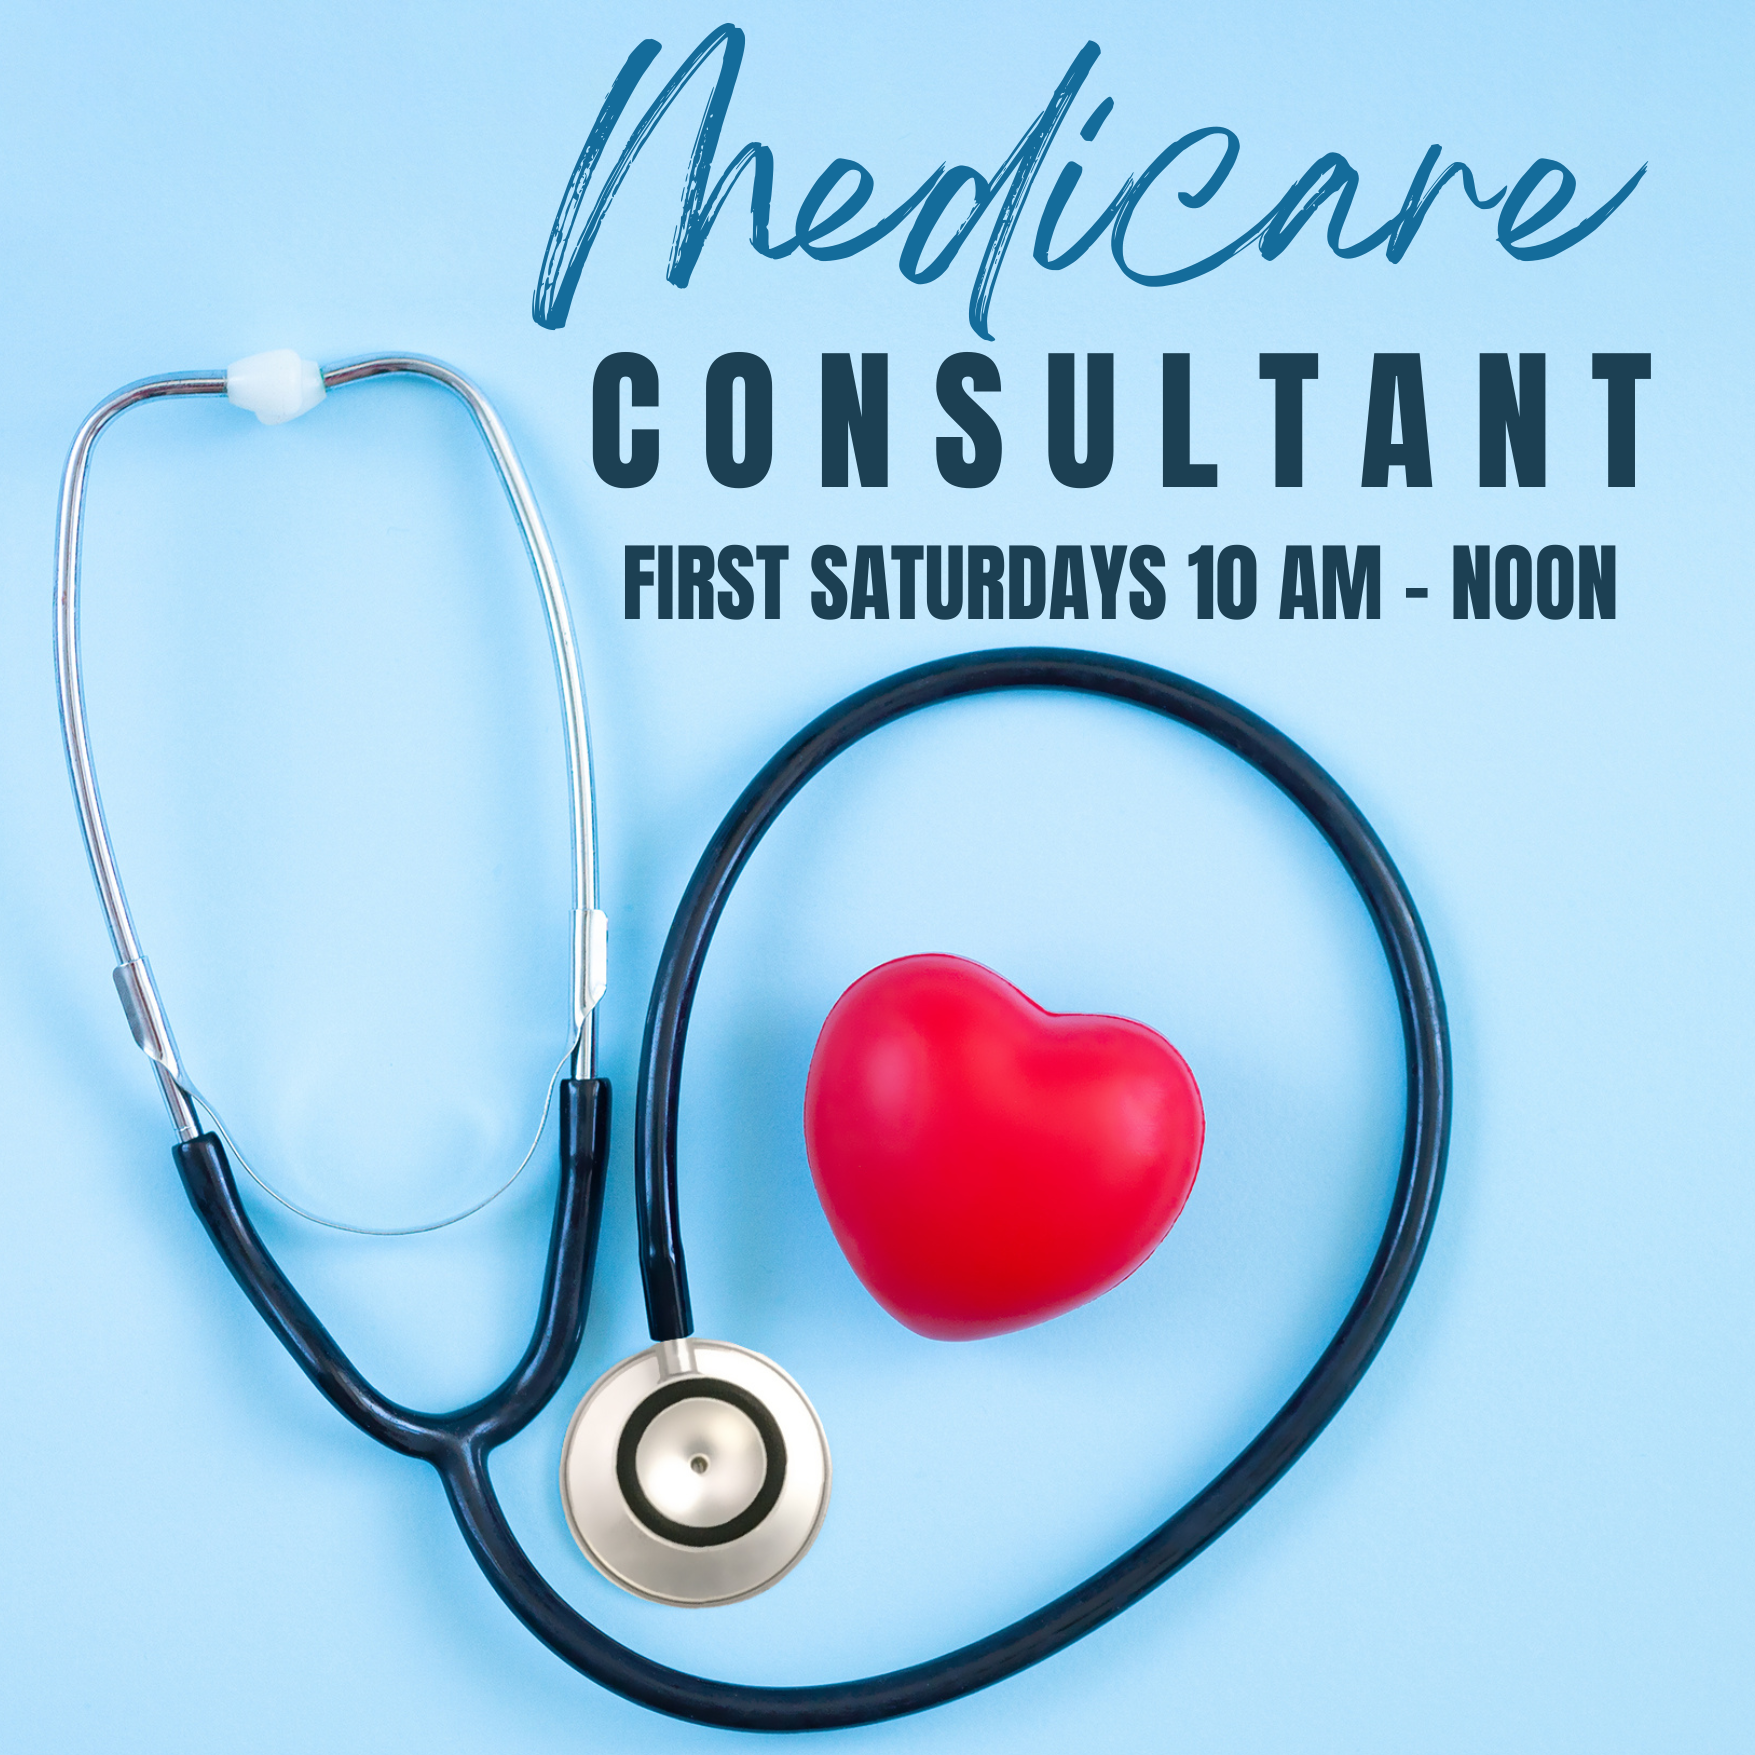 Medicare Consulting The first Saturday of every month at Beaver Creek Library